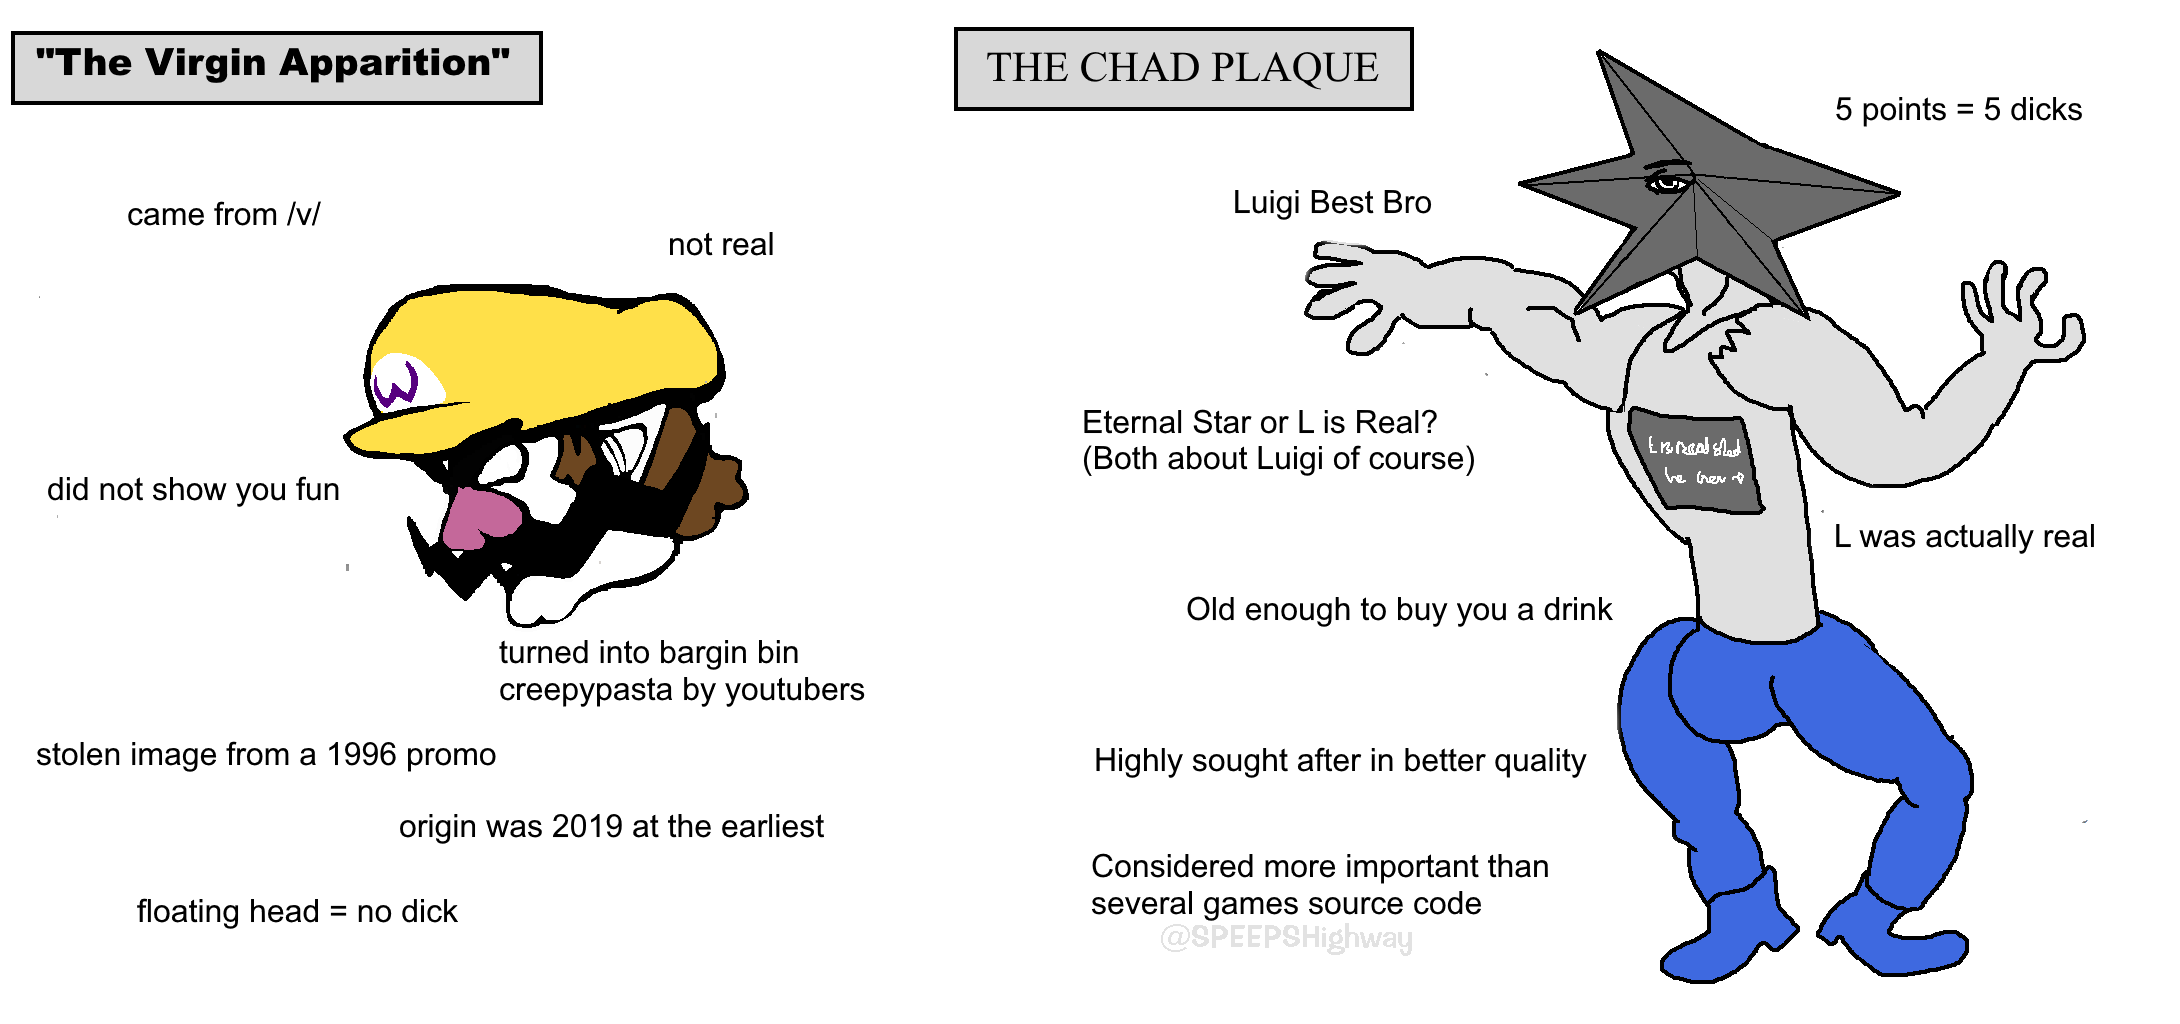 Chad Meme PNG Image File - PNG All